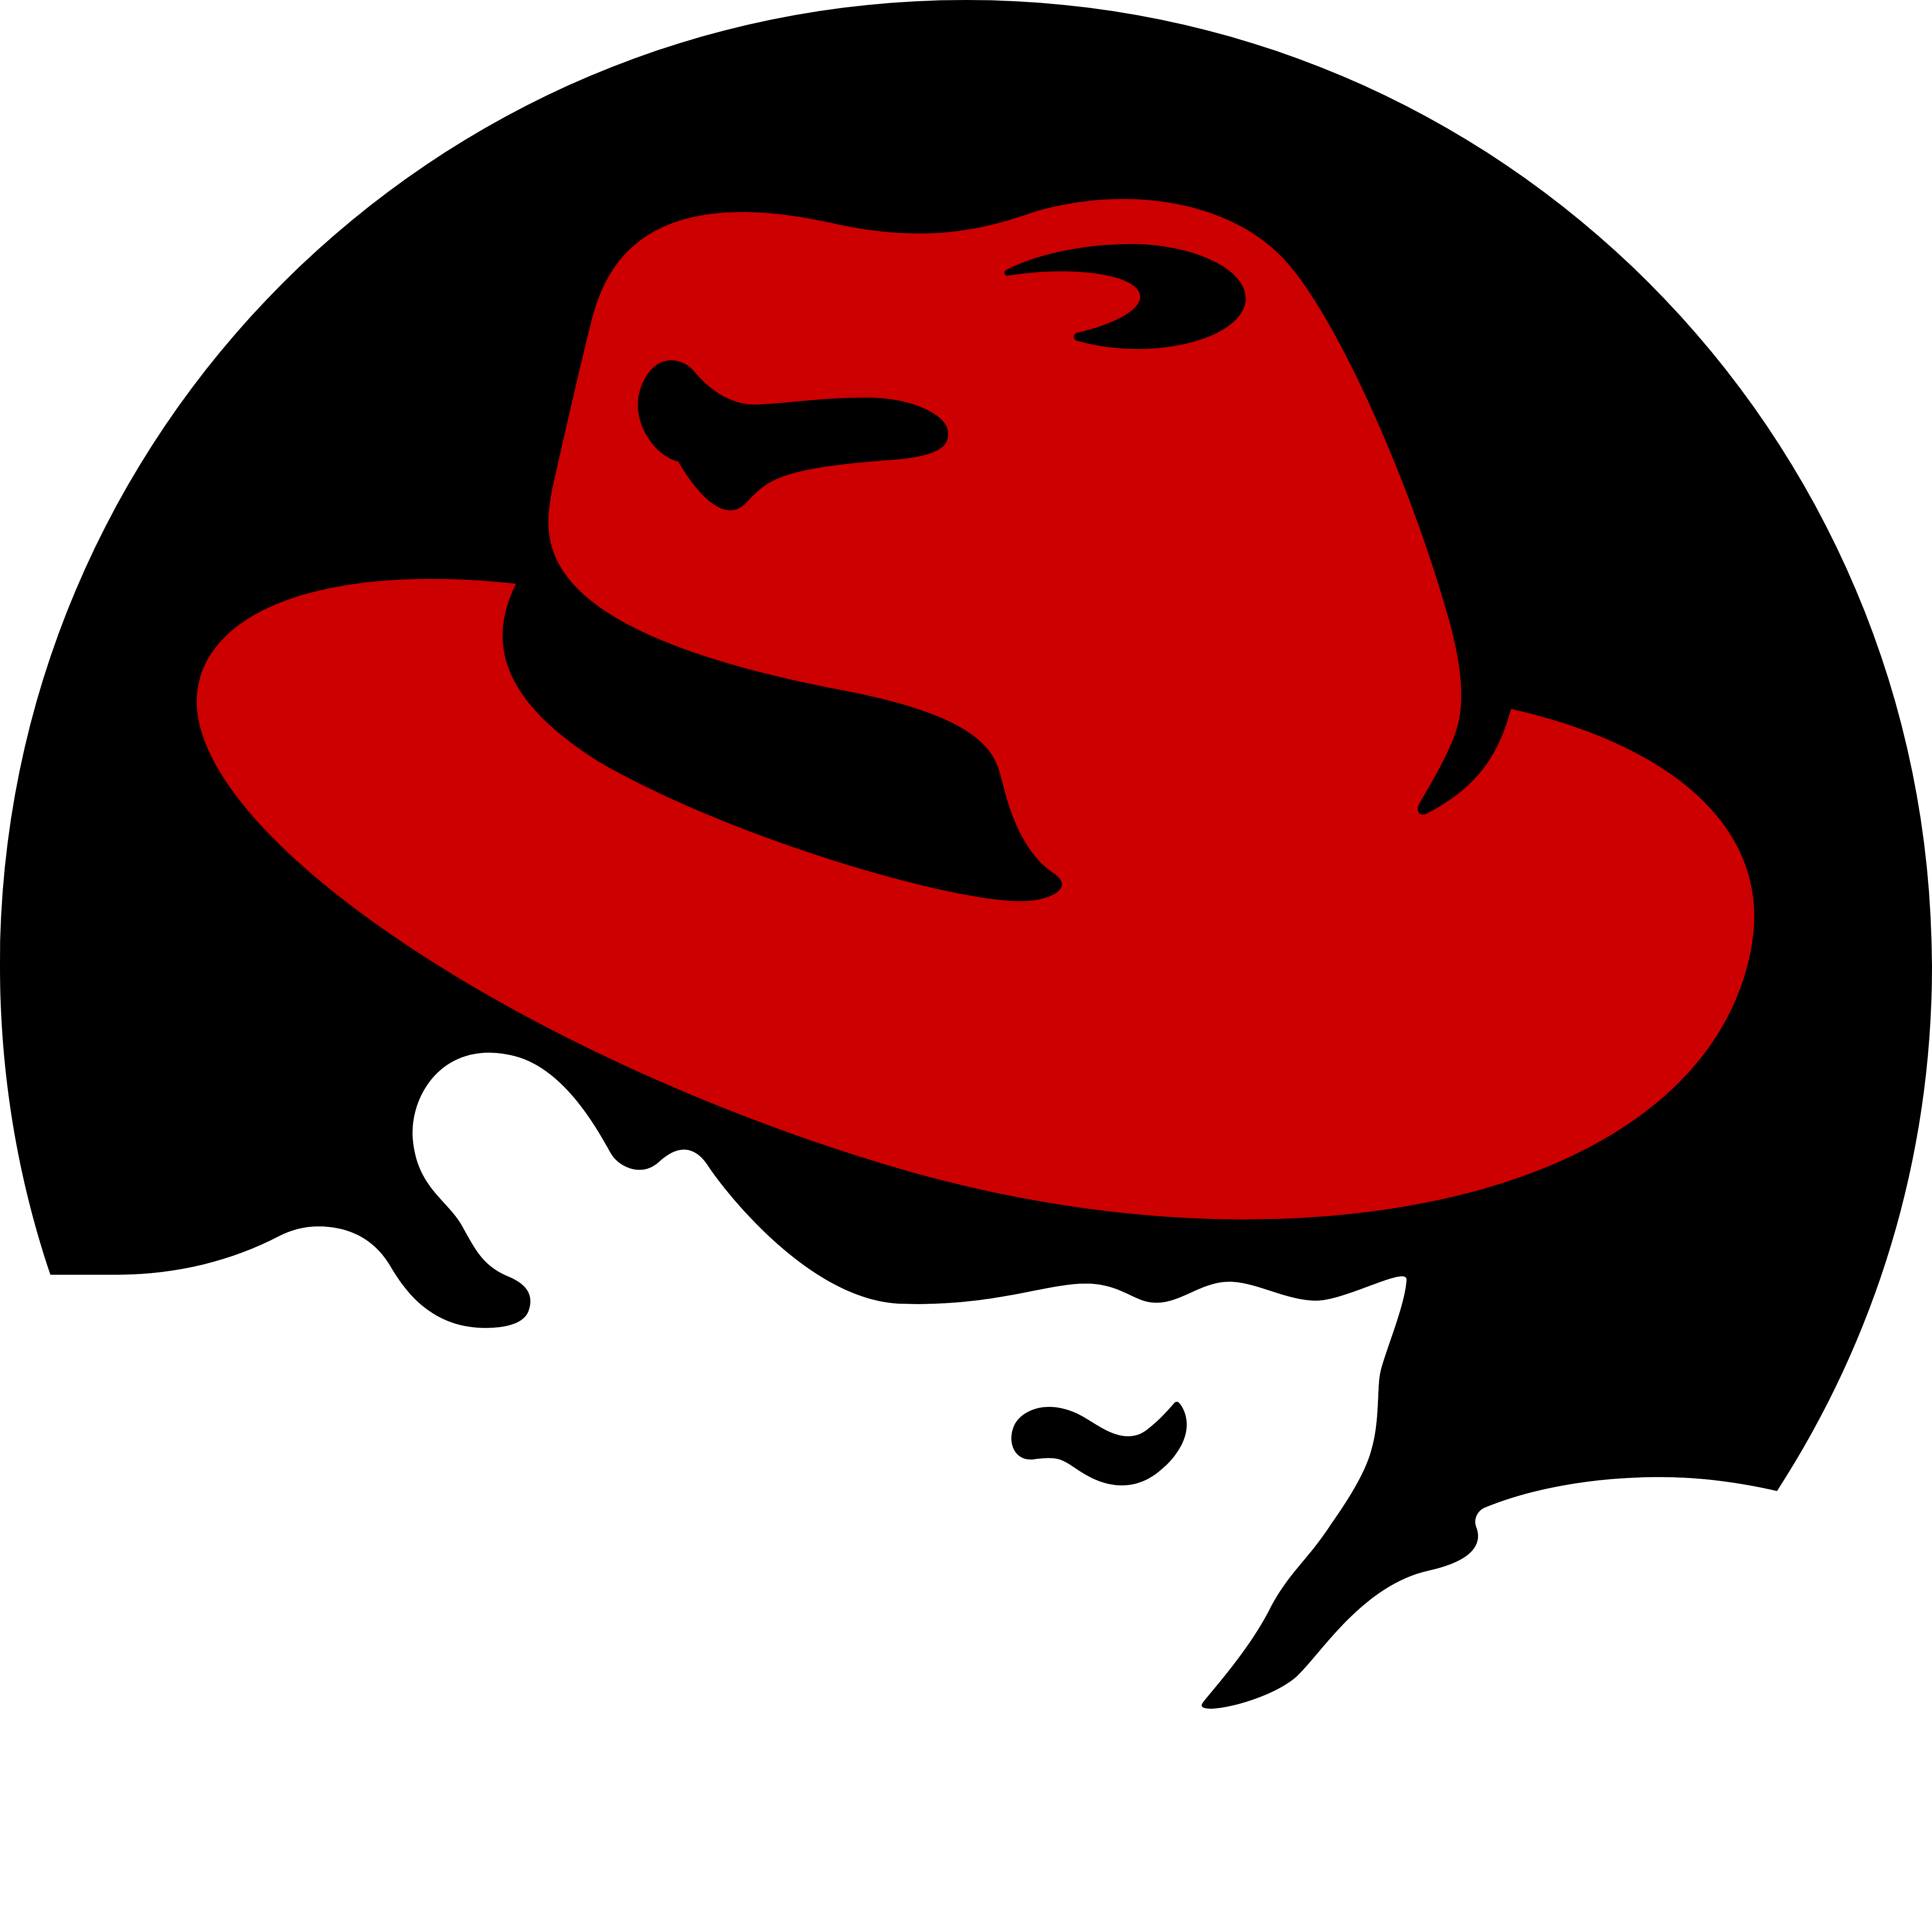 Red hat лого. Ред хат линукс. Red hat Linux logo. Дистрибутивы Linux Red hat. Red hat 7